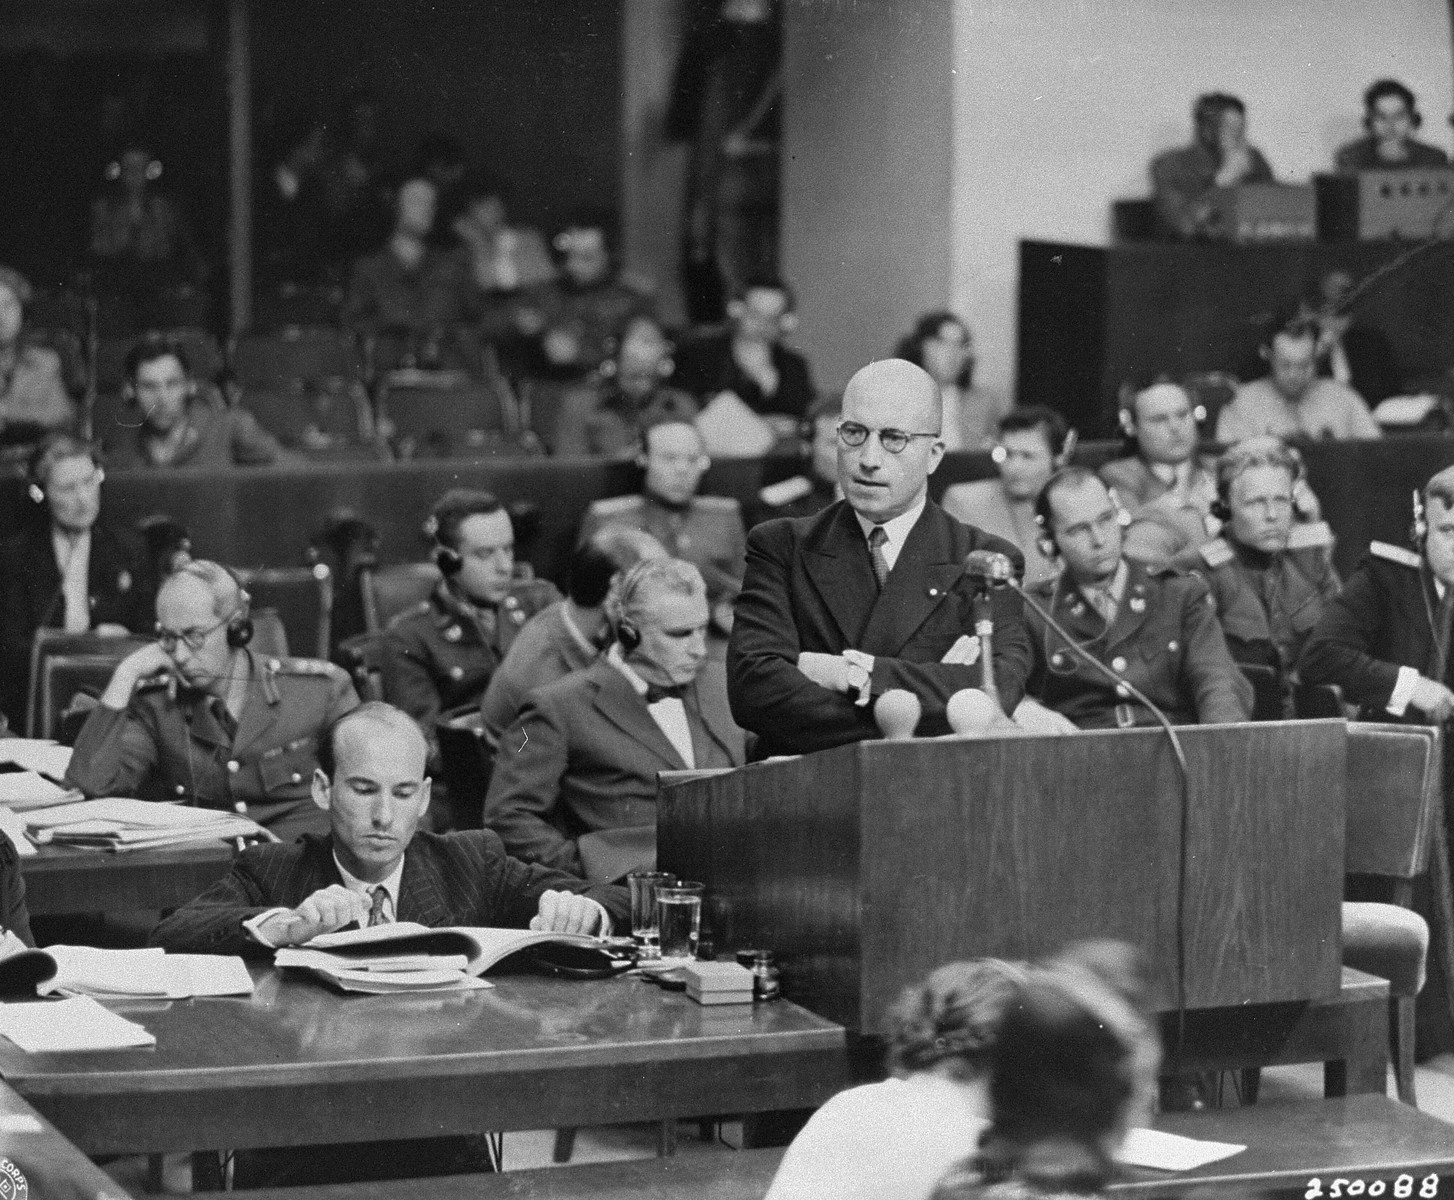 Deputy Chief Prosecutor Charles Dubost presents the French prosecution's final statement at the International Military Tribunal trial of war criminals at Nuremberg.